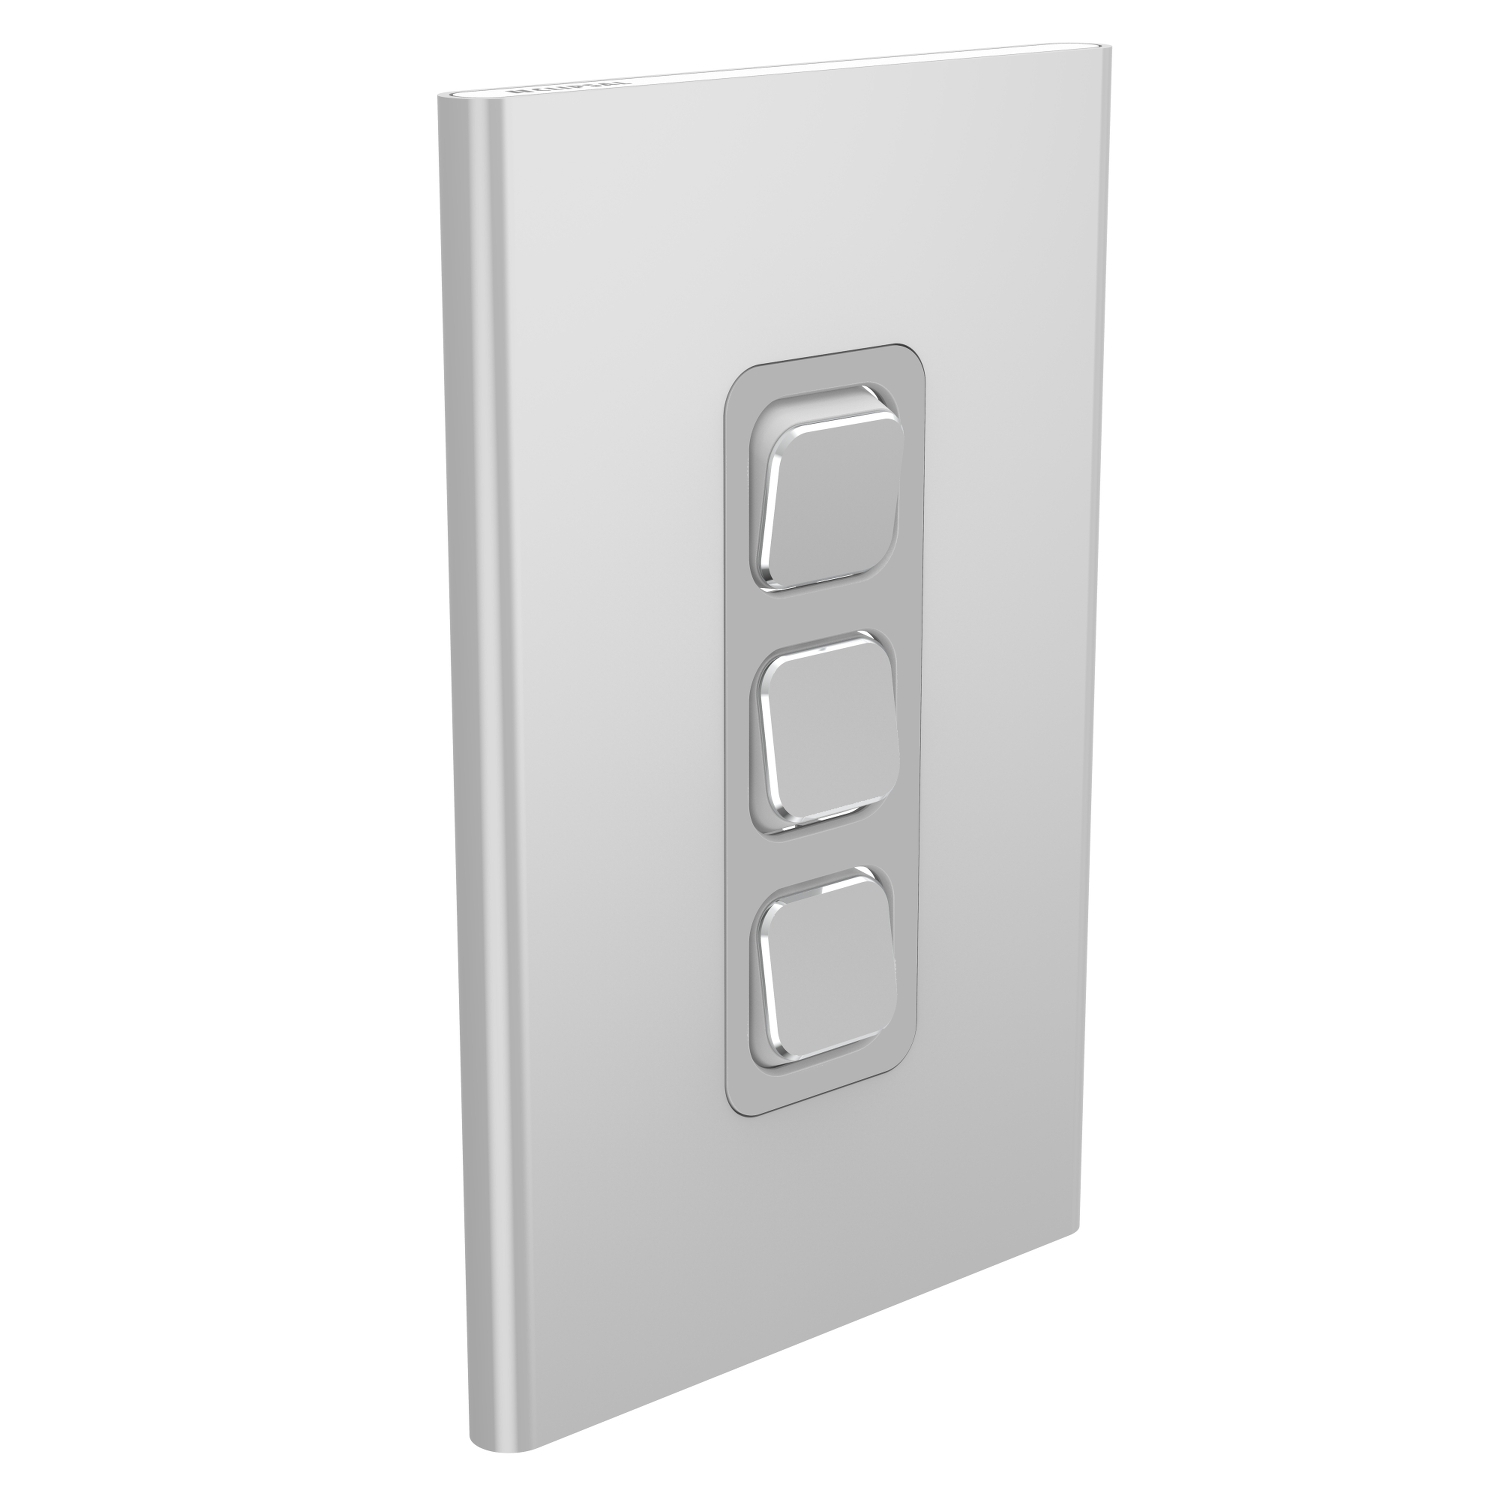 PDL Iconic Styl, cover frame, 3 switches, vertical - Silver